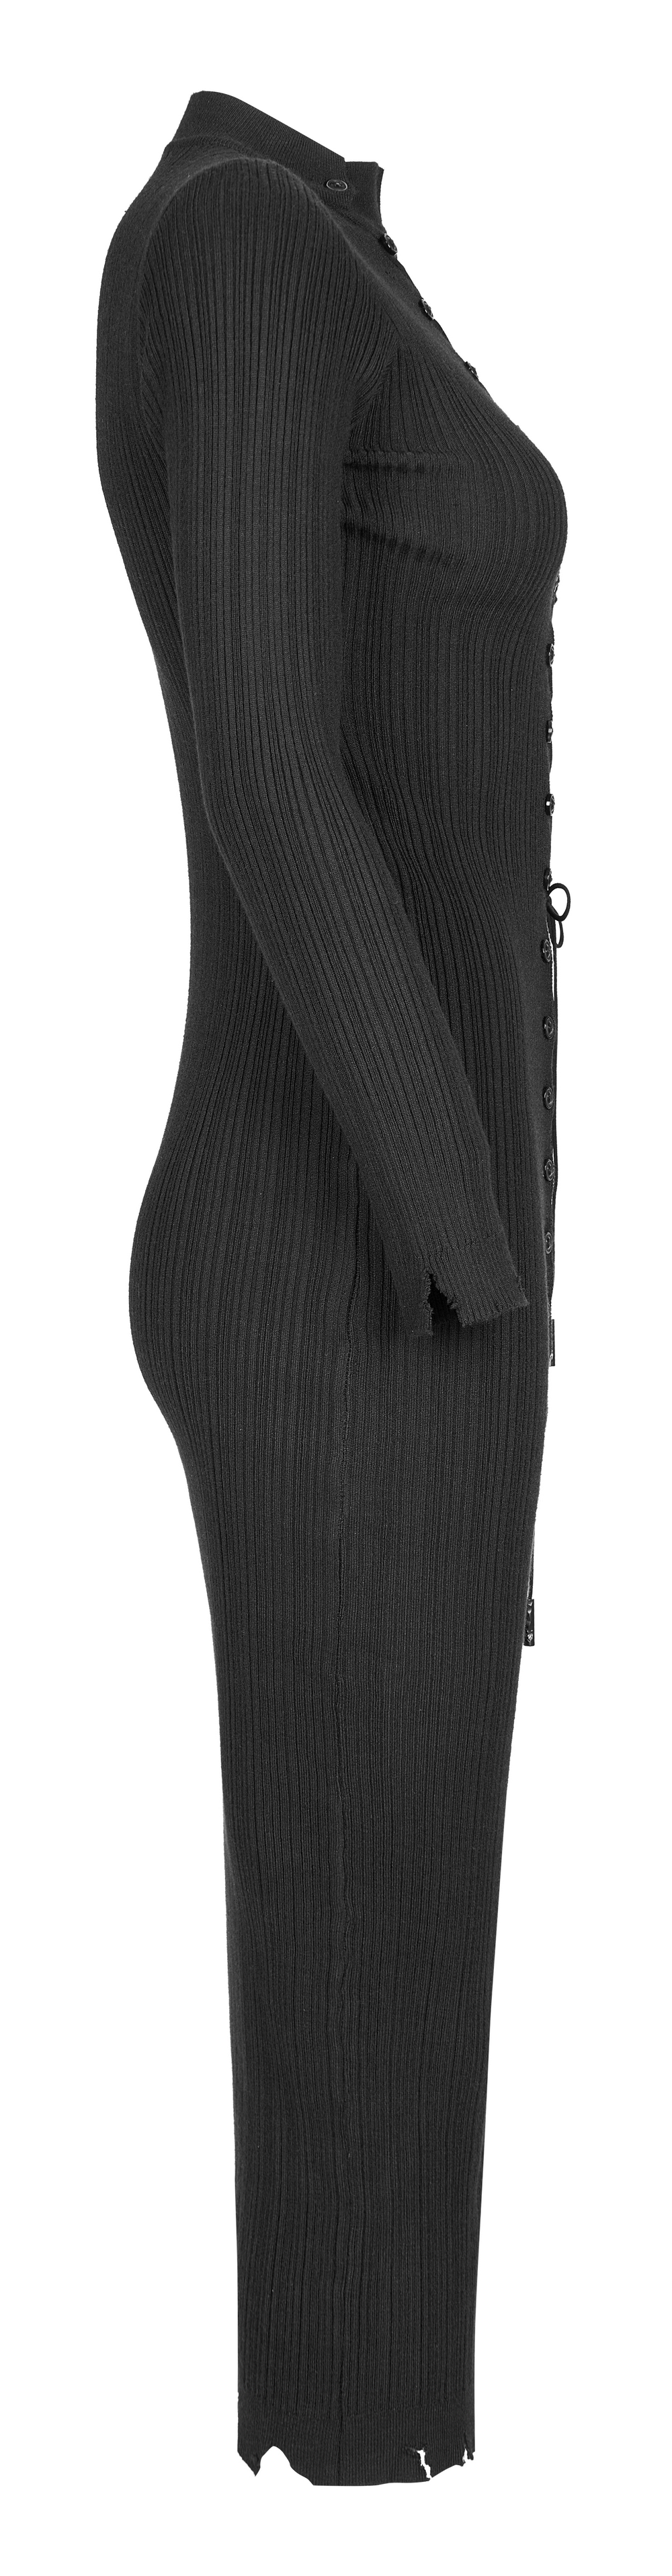 Versatile Wool Knit Sexy Dress with Lace-Up Detail - HARD'N'HEAVY